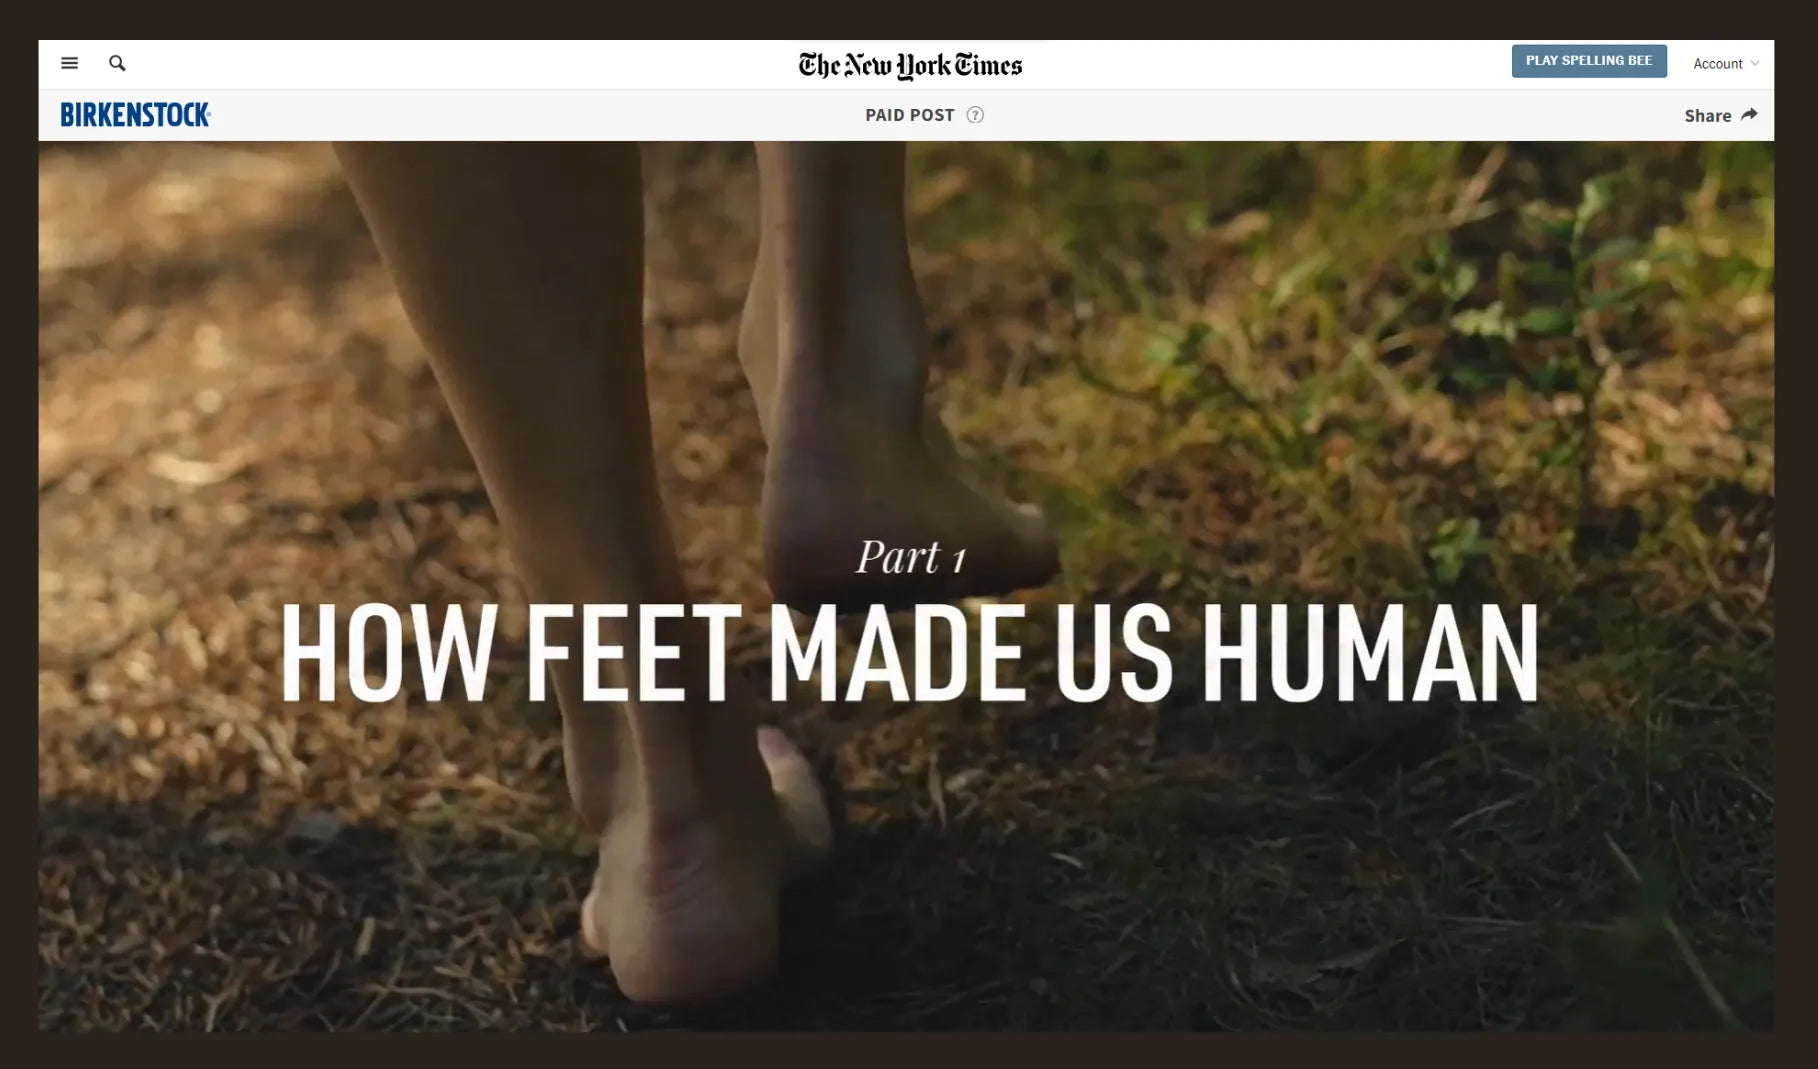 Birkenstock paid post in The New York Times